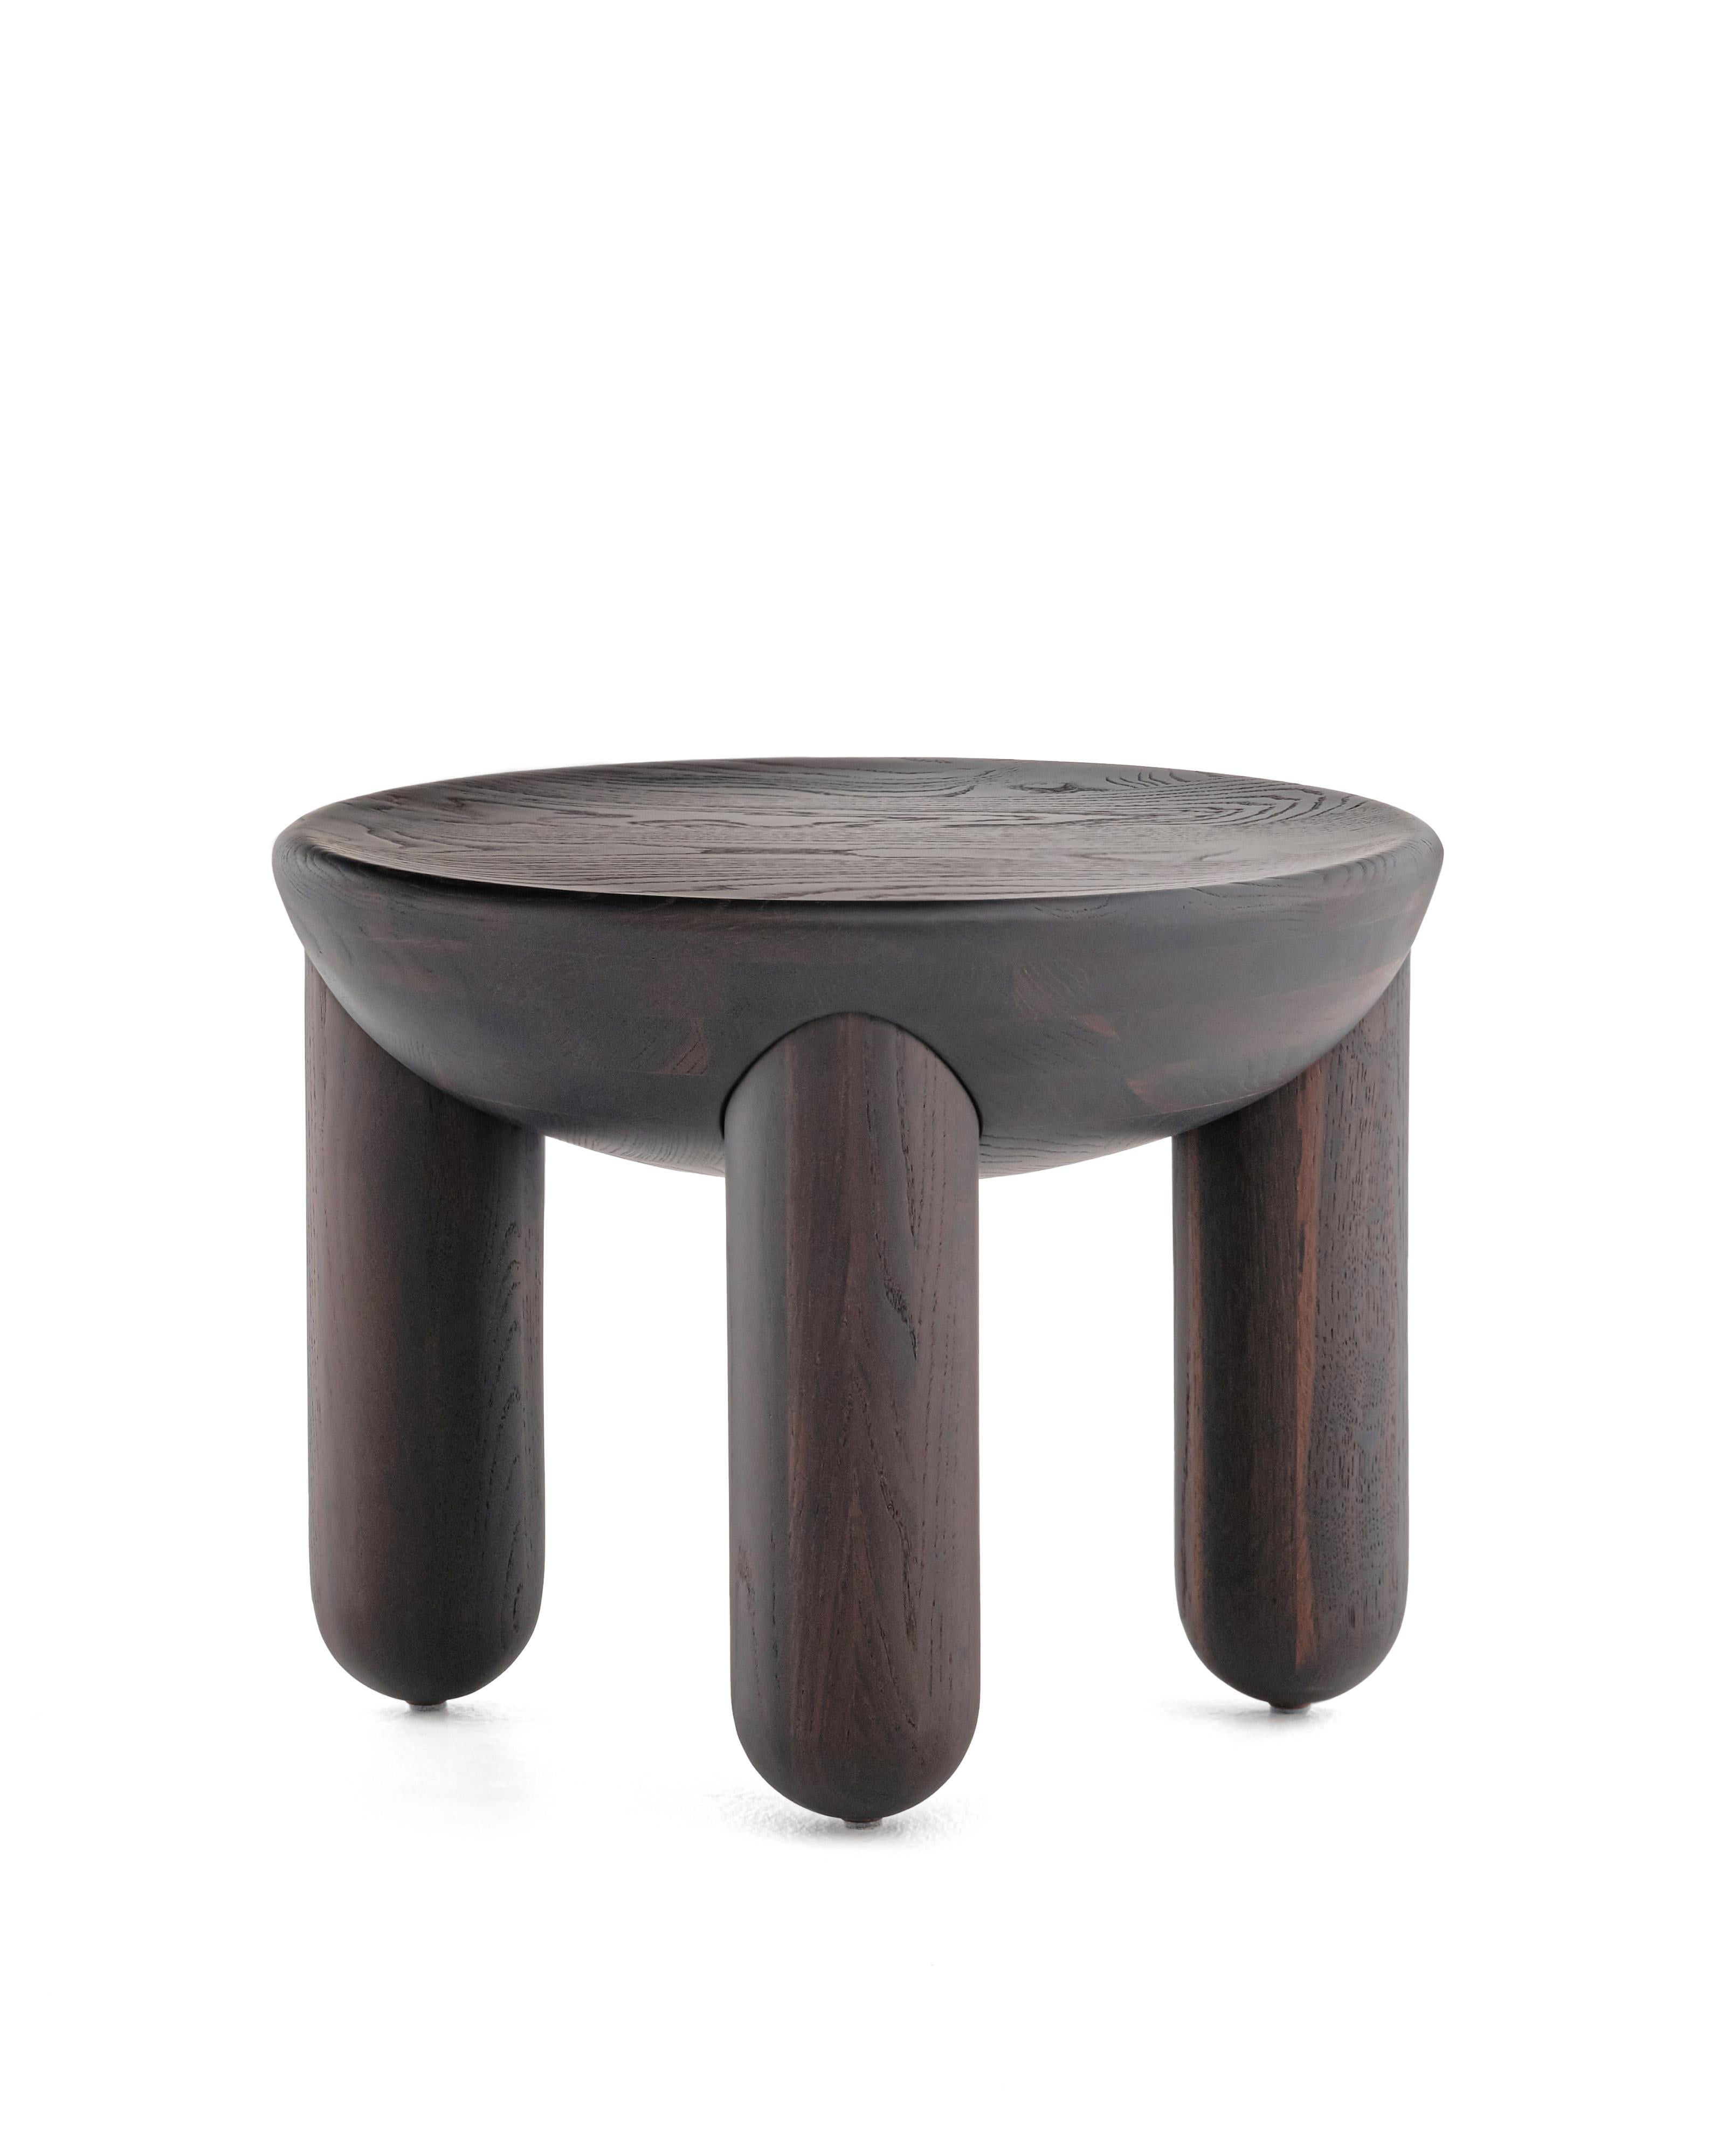 Stained Wooden Coffee Table Freyja 2 in Thermo Oak finish by Noom